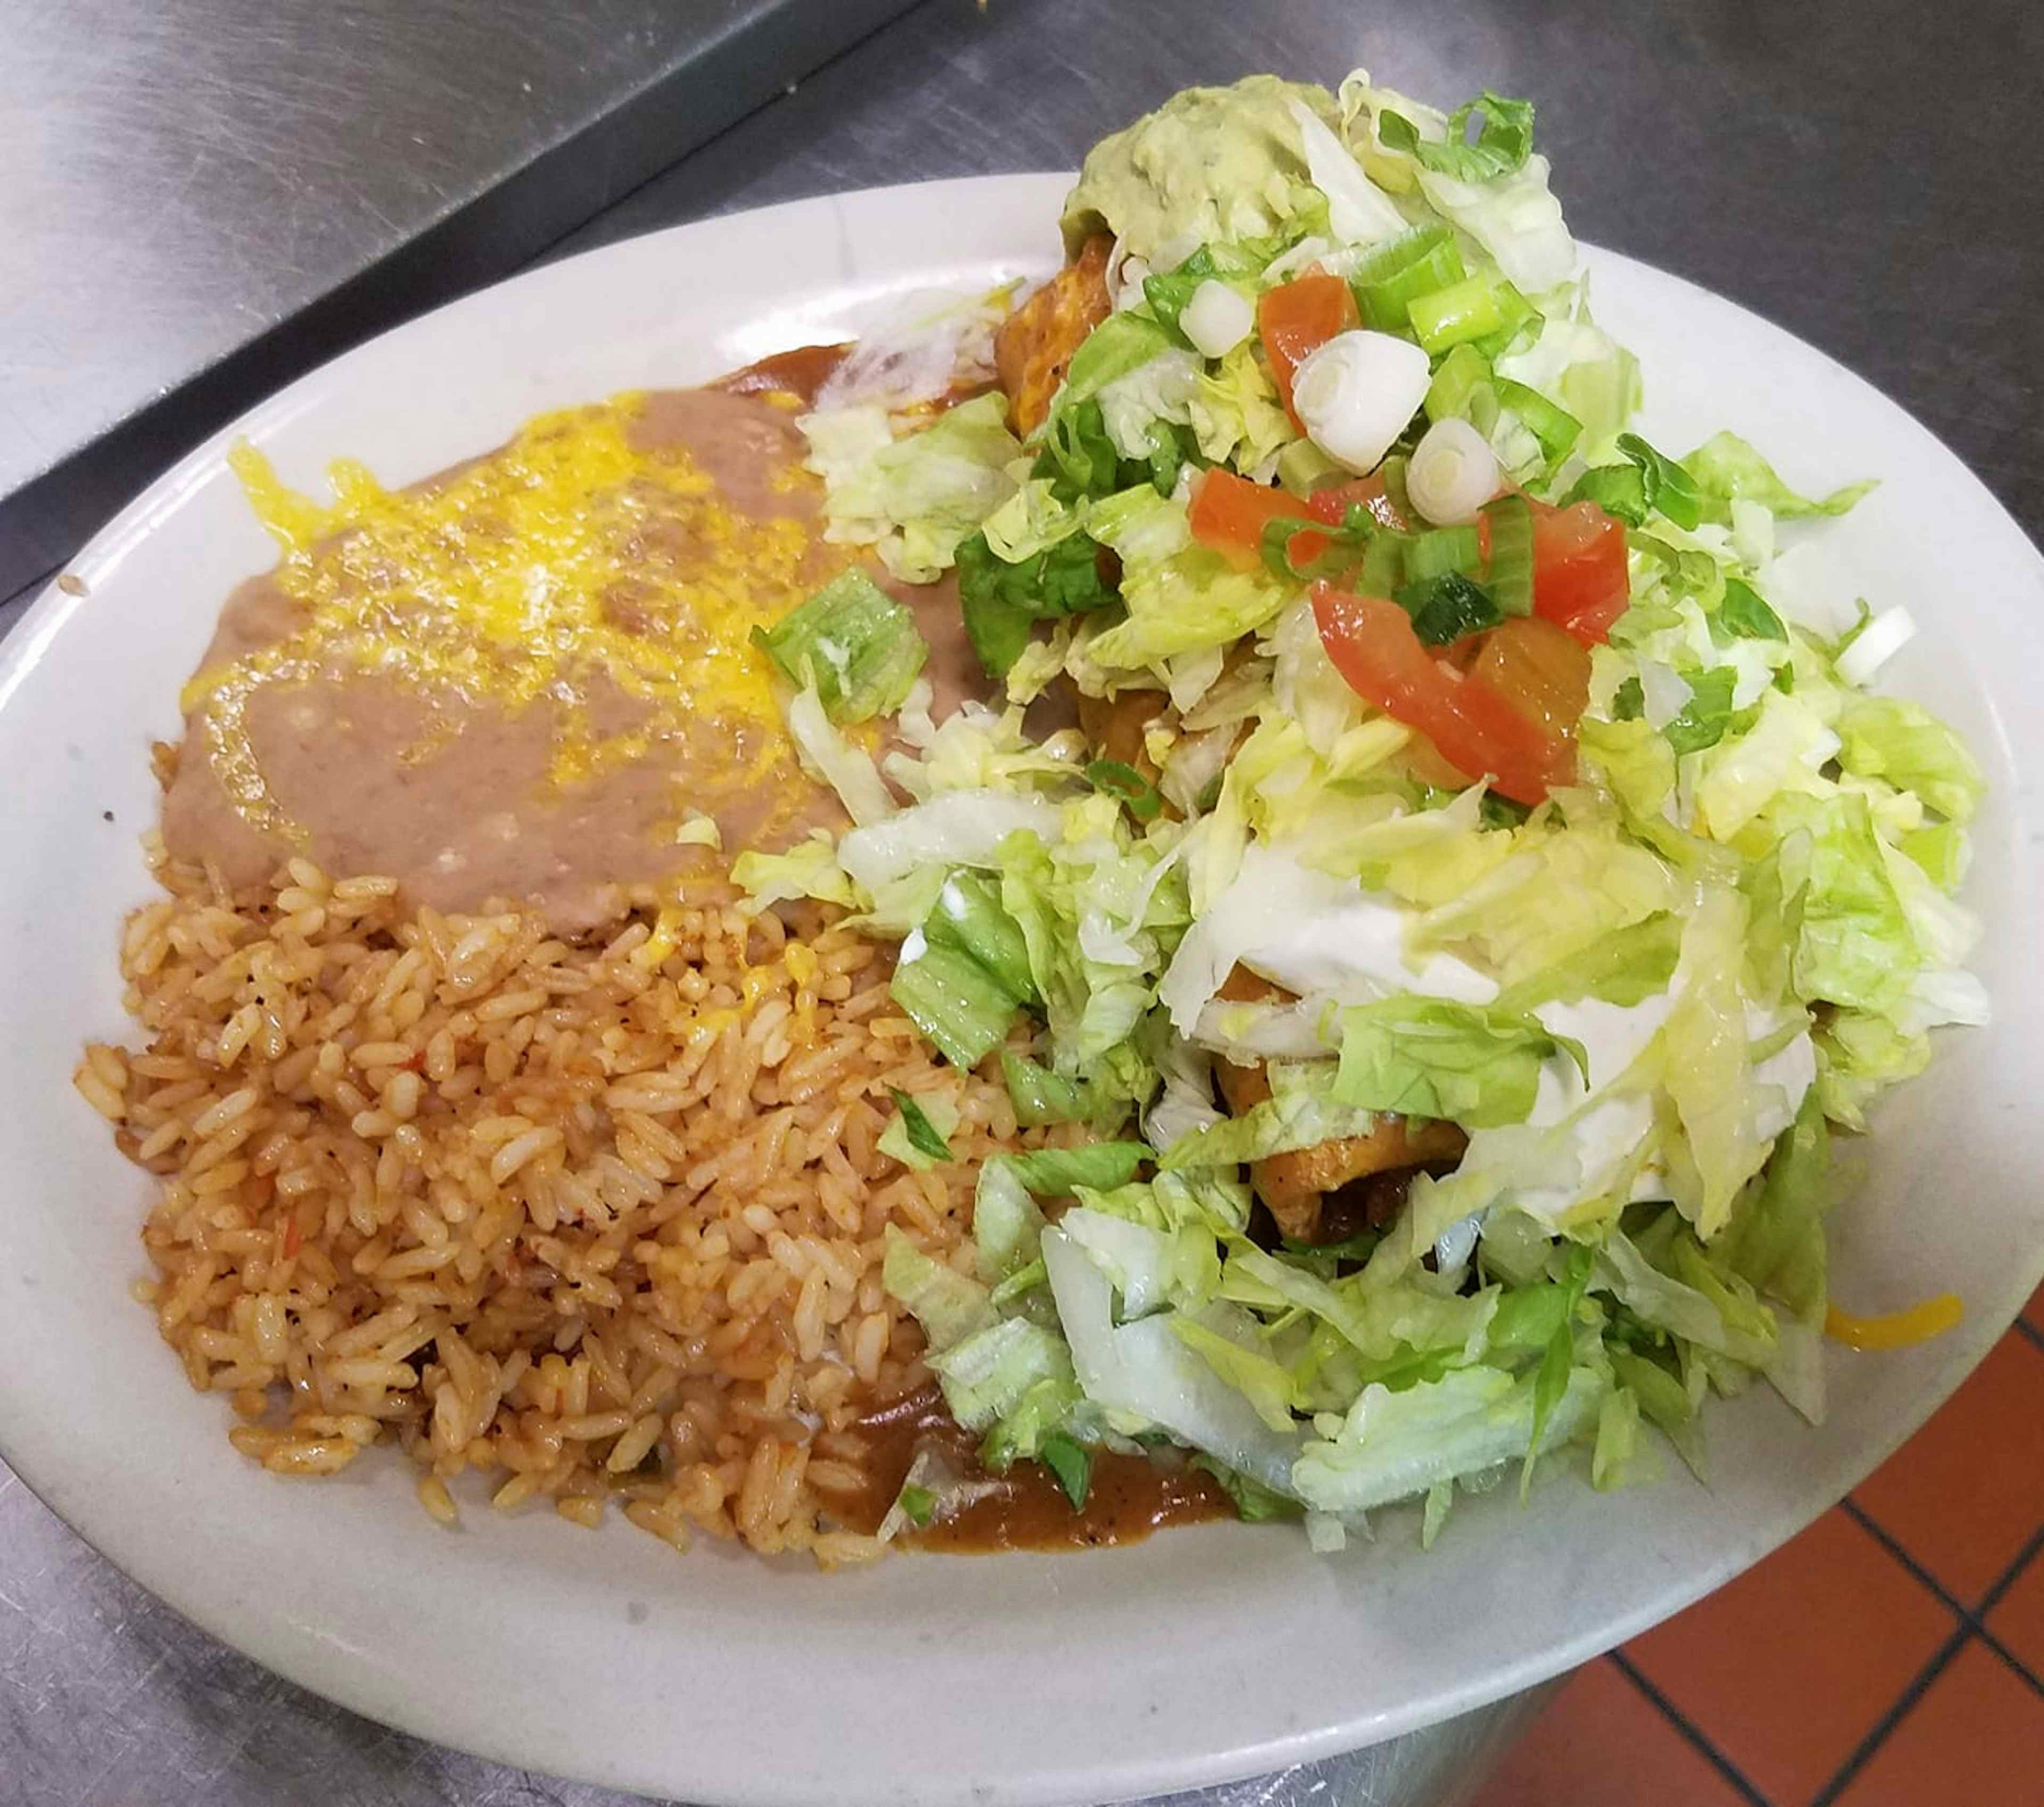 One of the many delicious meals of Mexican-cuisine that Plum Loco of Idaho Falls, Idaho in the Yellowstone Teton Territory has to offer